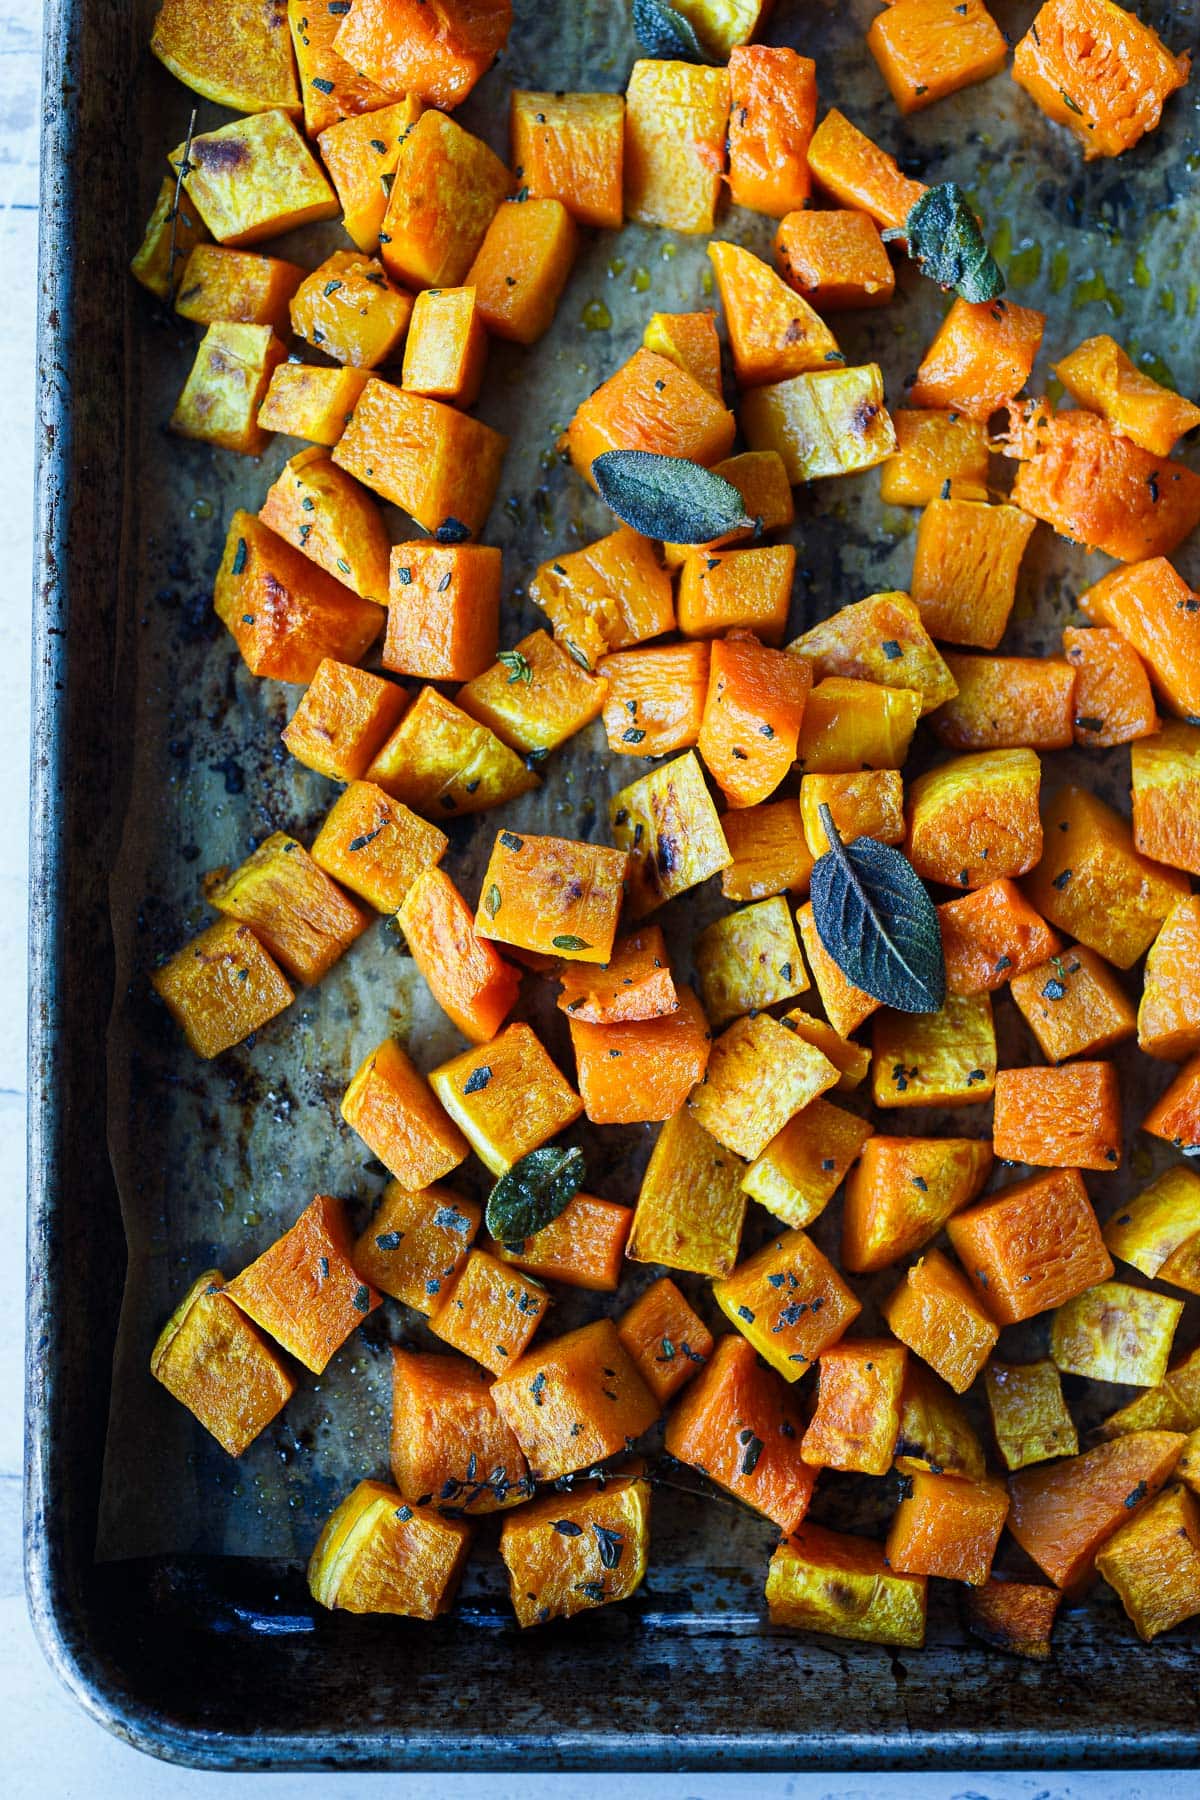 cubed roasted butternut squash on parchment lined baking sheet with caramelized edges and herbs